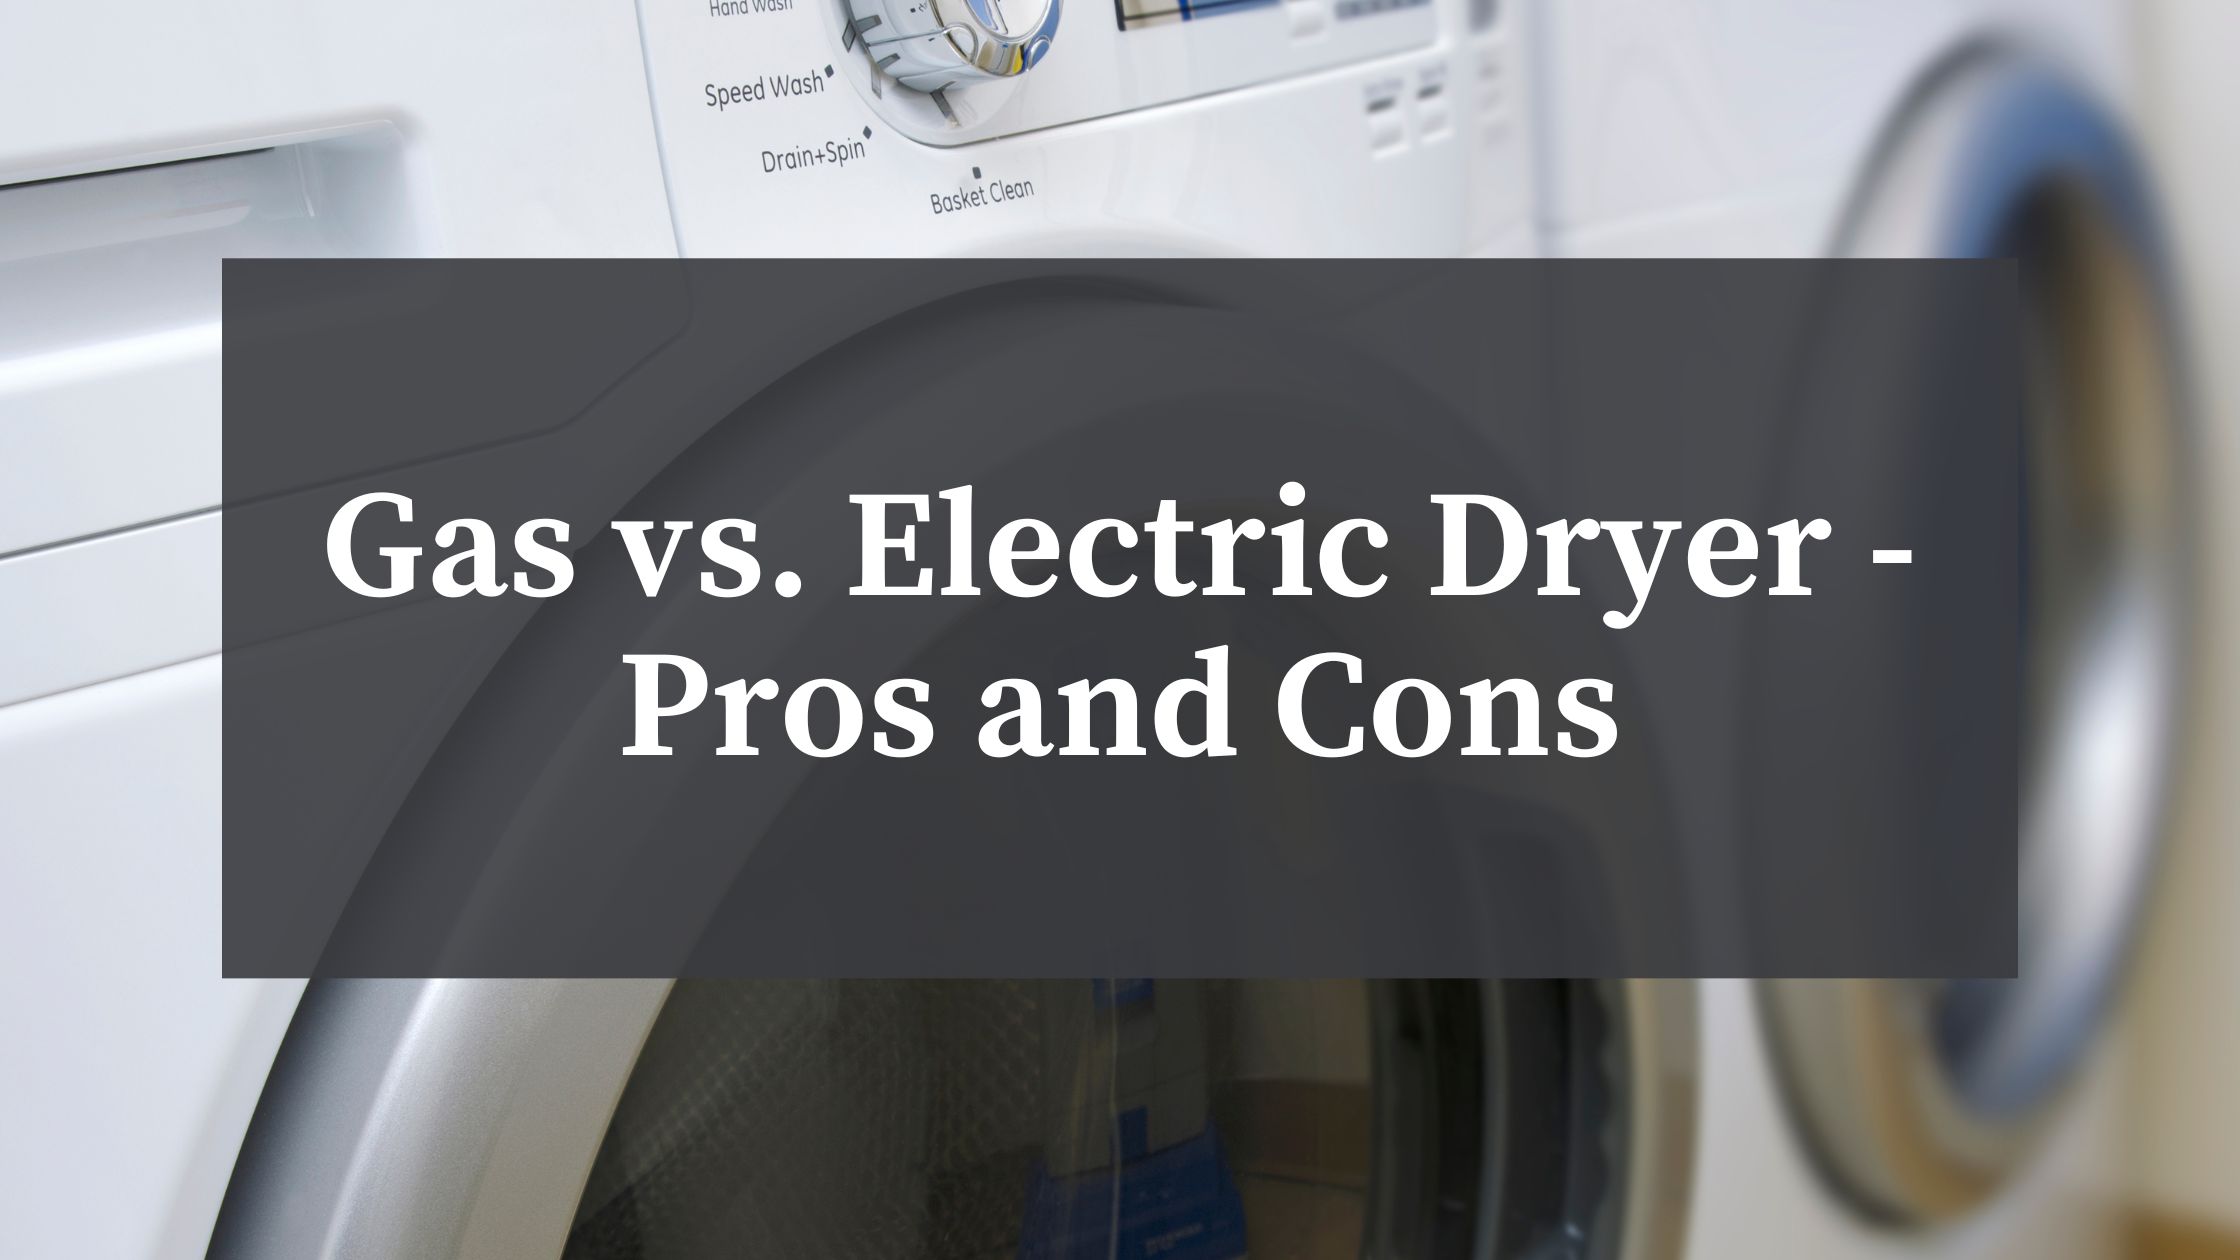 gas-vs-electric-dryer-pros-and-cons-atherton-appliance-blog